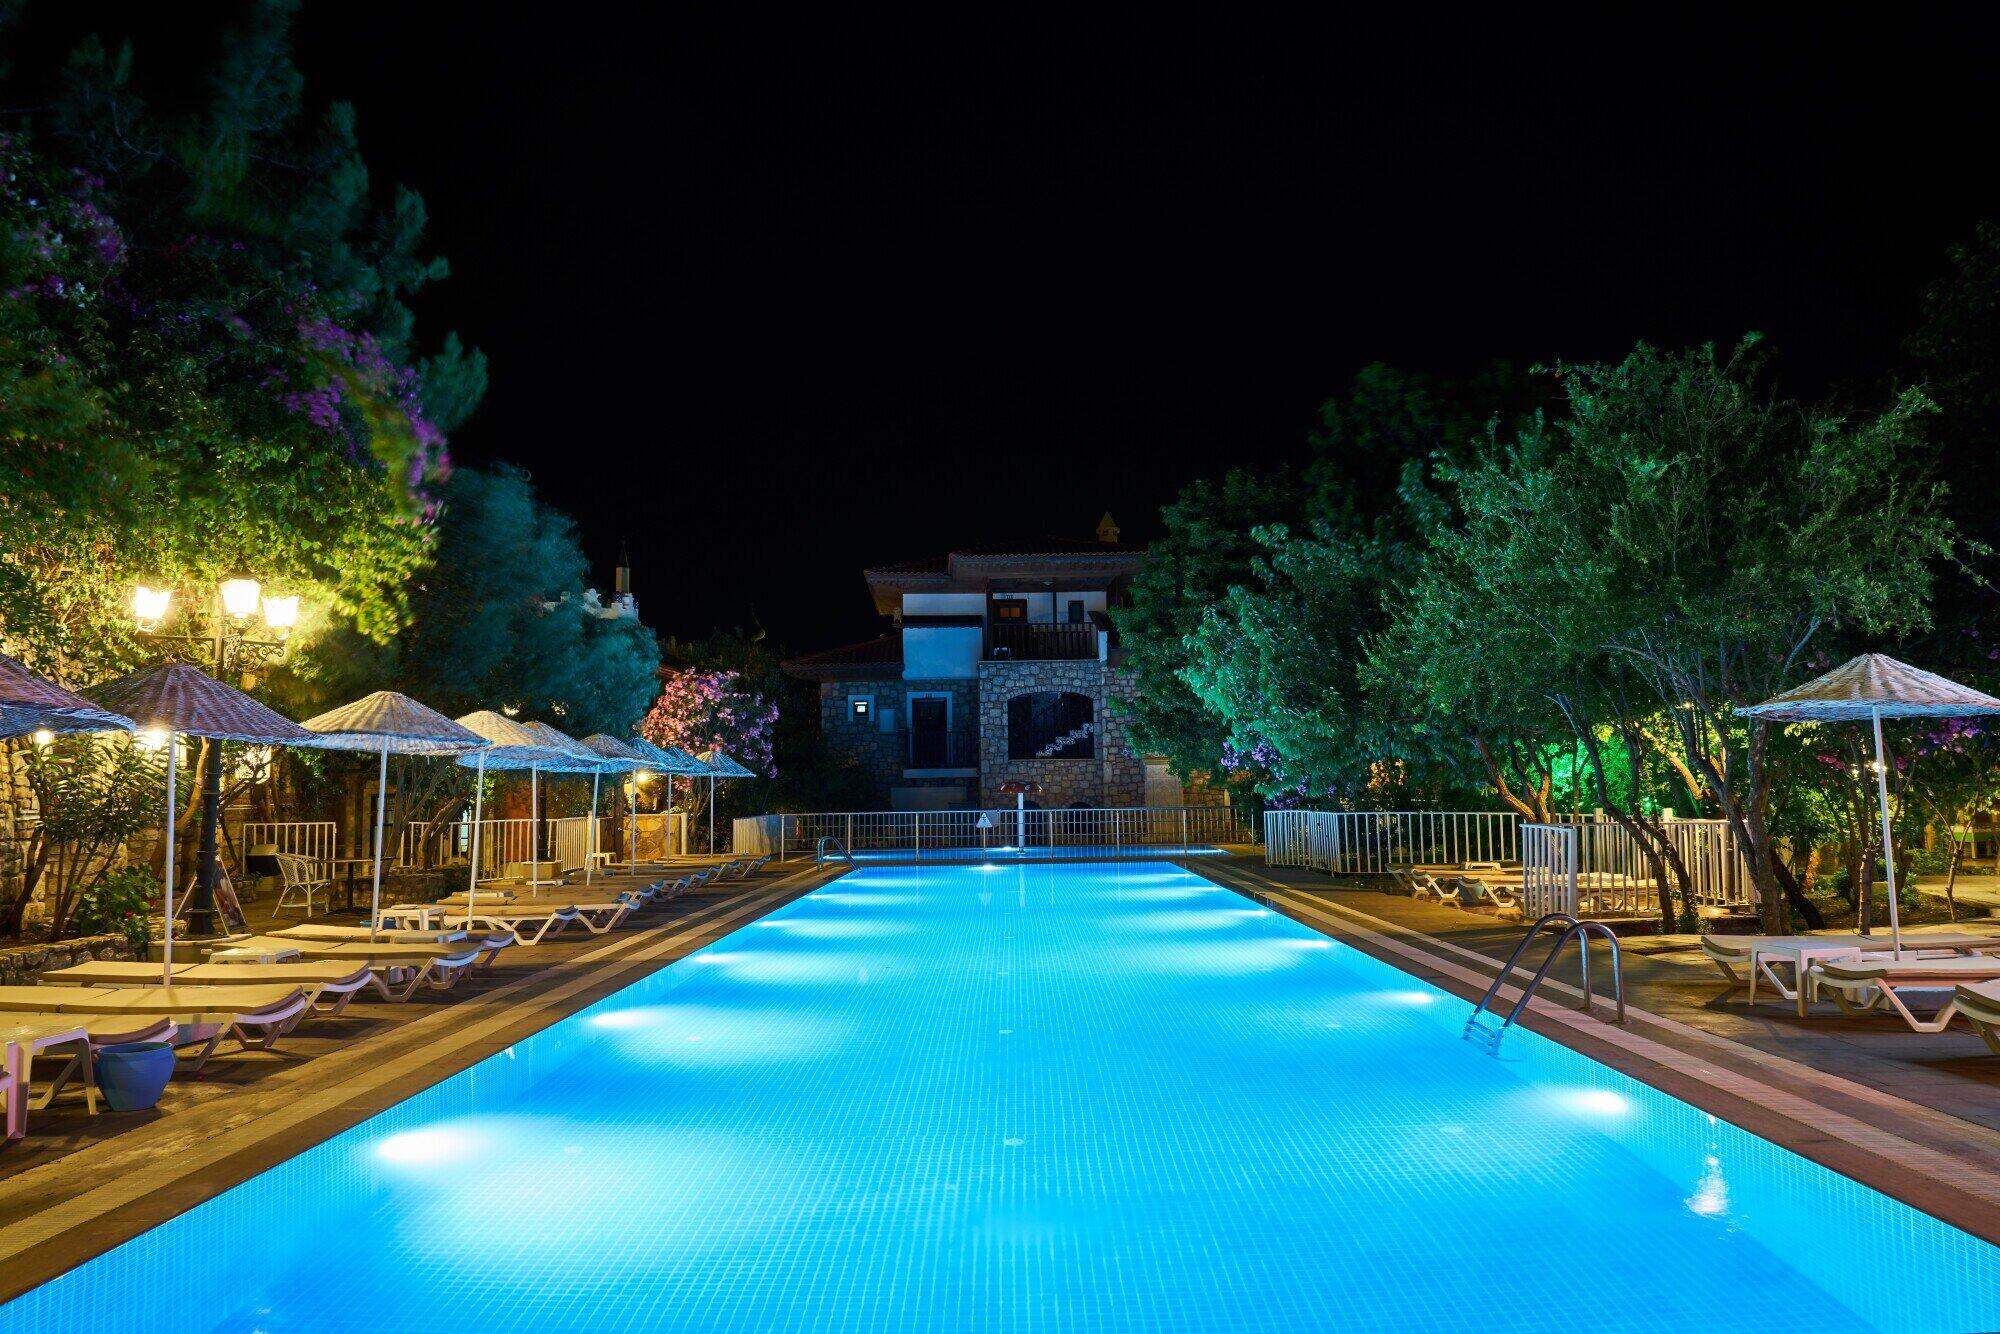 The Role of Lighting in Creating a Stunning Nighttime Pool Ambiance